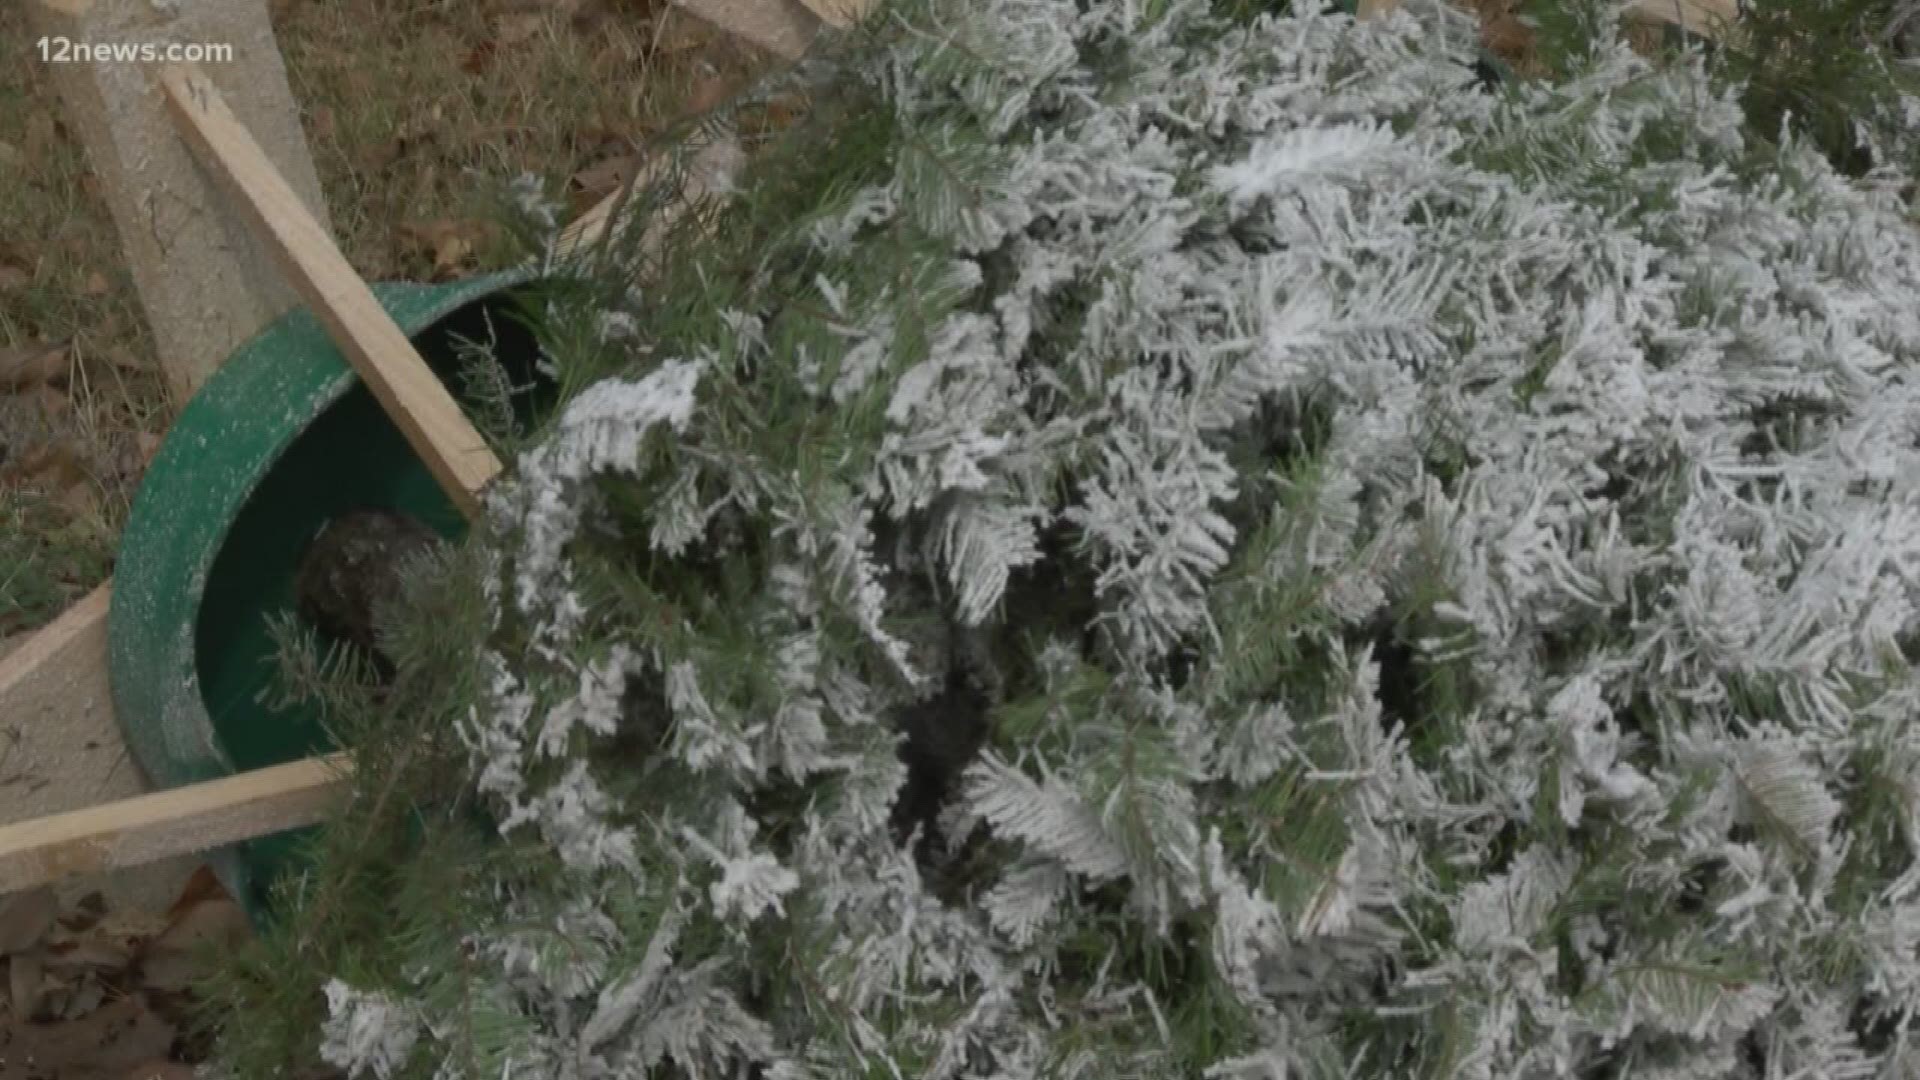 Various cities are already accepting Christmas trees for recycling, here's what you need to know.